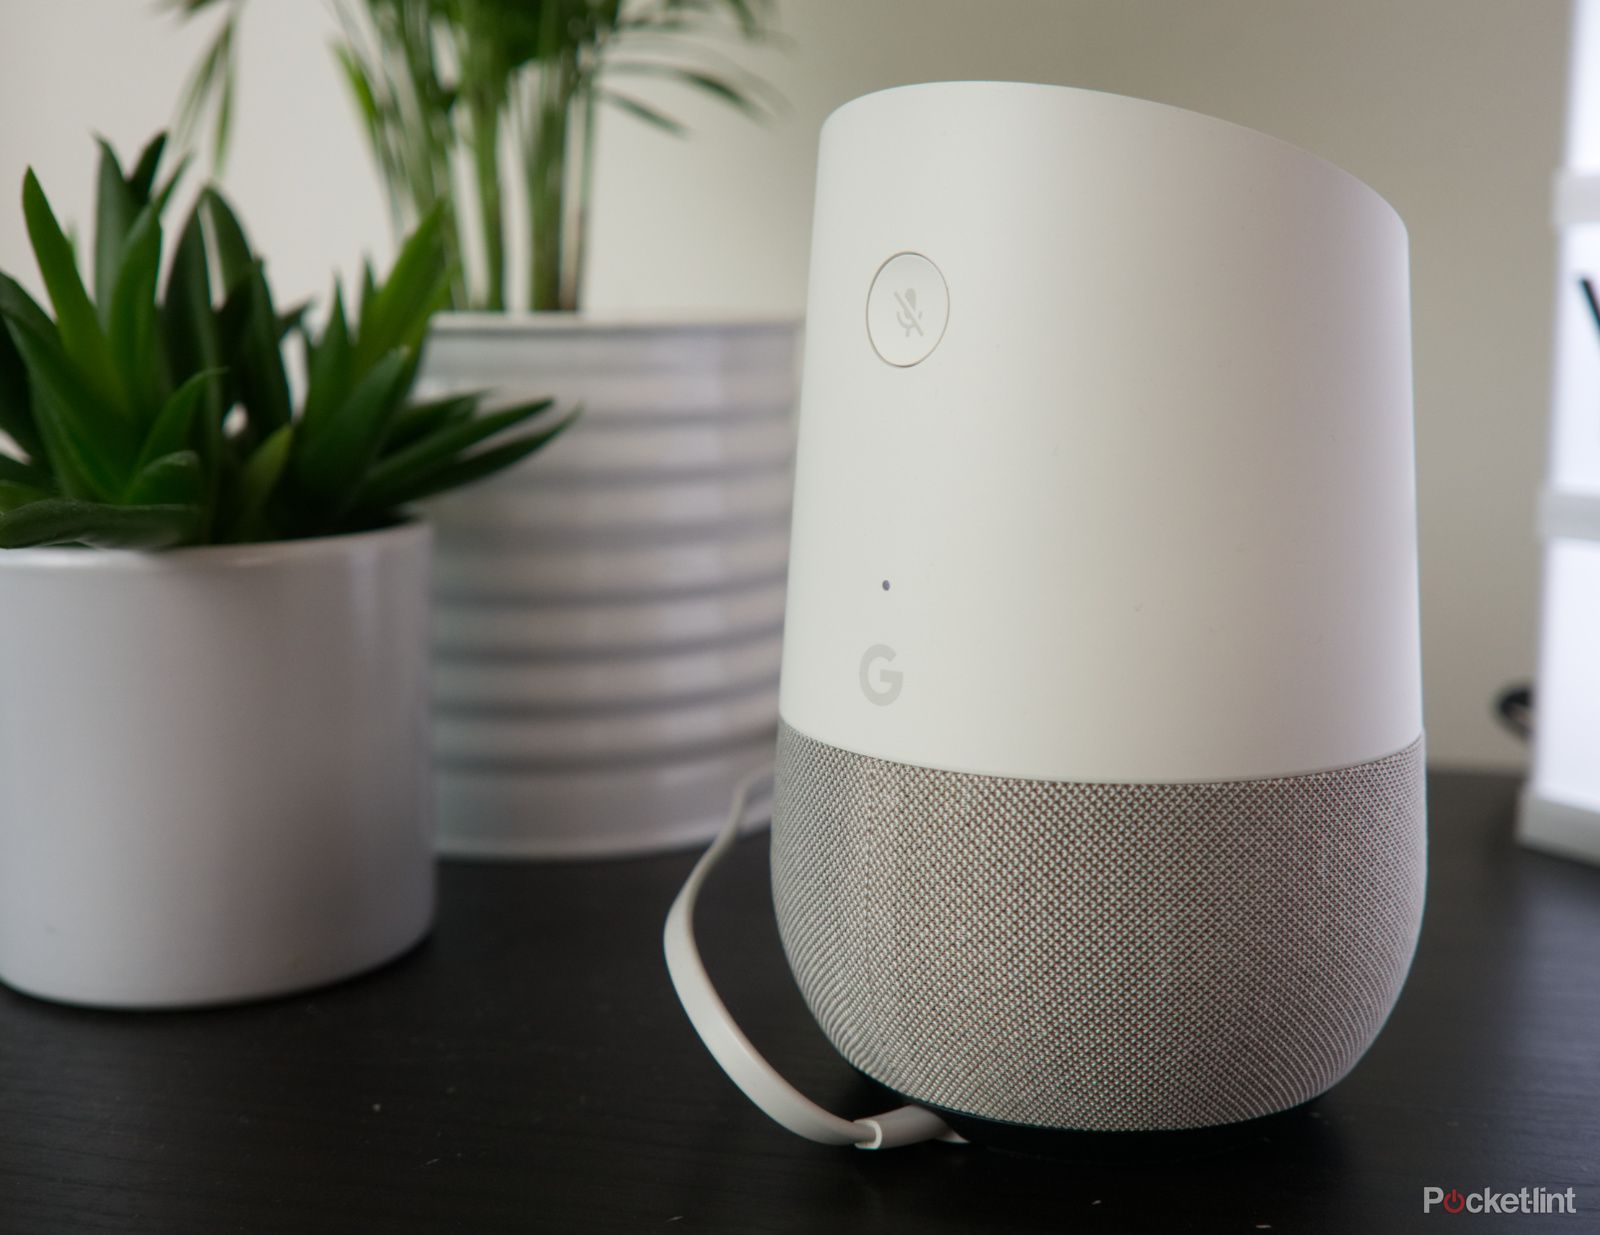 you can now control lg smart home appliances using google home image 1